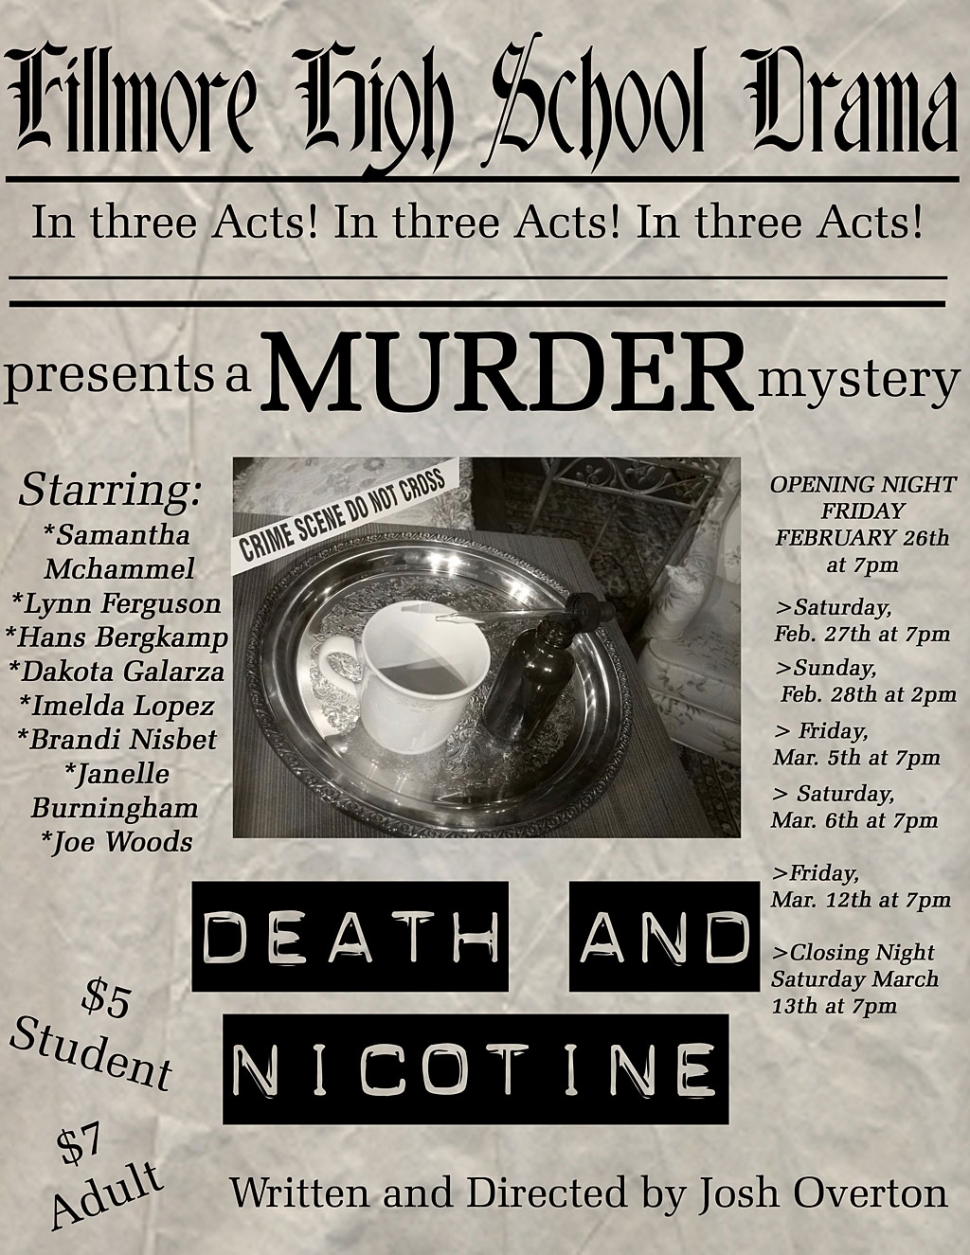 What happens when a New York Police Detective, on vacation in Georgia, stumbles upon a murder investigation?  More murder, of course!  Who is guilty?  Surprises and a few laughs await you!  "Death and Nicotine", another original script by Fillmore High School English and Drama teacher, as well as ASB Advisor Josh Overton, takes the stage starting this Friday night in the drama room at the high school. There are seven total performances of this comedic murder mystery, including: Friday, Feb. 26th at 7pm - Opening Night
Saturday, Feb. 27th at 7pm, Sunday, Feb. 28th at 2pm - the only matinee performance!
Friday, March 5th at 7pm, Saturday, March 6th at 7pm, Friday, March 12th at 7pm
Saturday, March 13th at 7pm - Closing Night.
Tickets, available at the door only, are just $5 for students and $7 for adults!  The house opens 30 minutes before curtain, so get there early to get the best seats available!